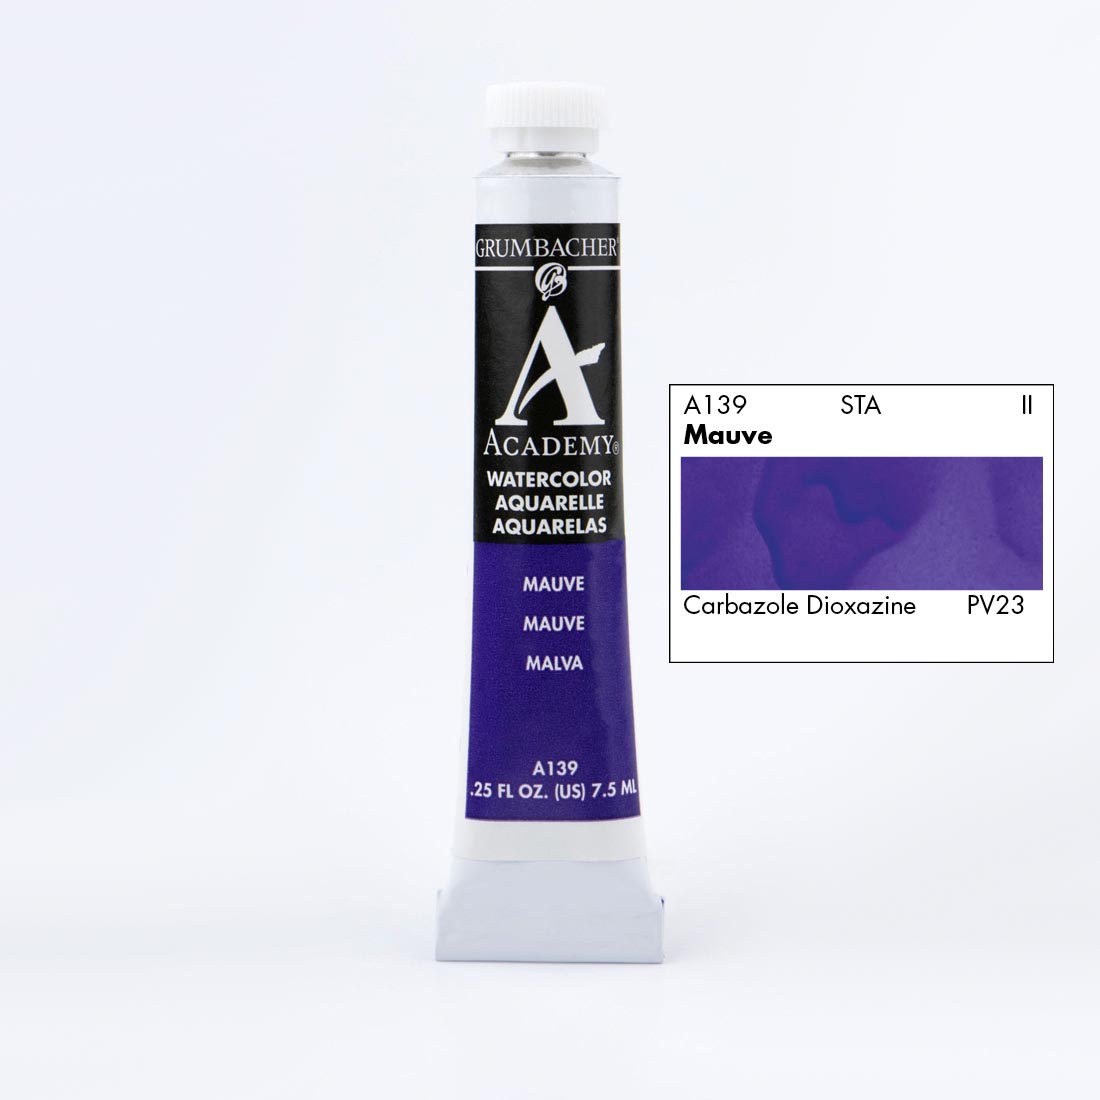 Tube of Grumbacher Academy Watercolor beside Mauve color swatch